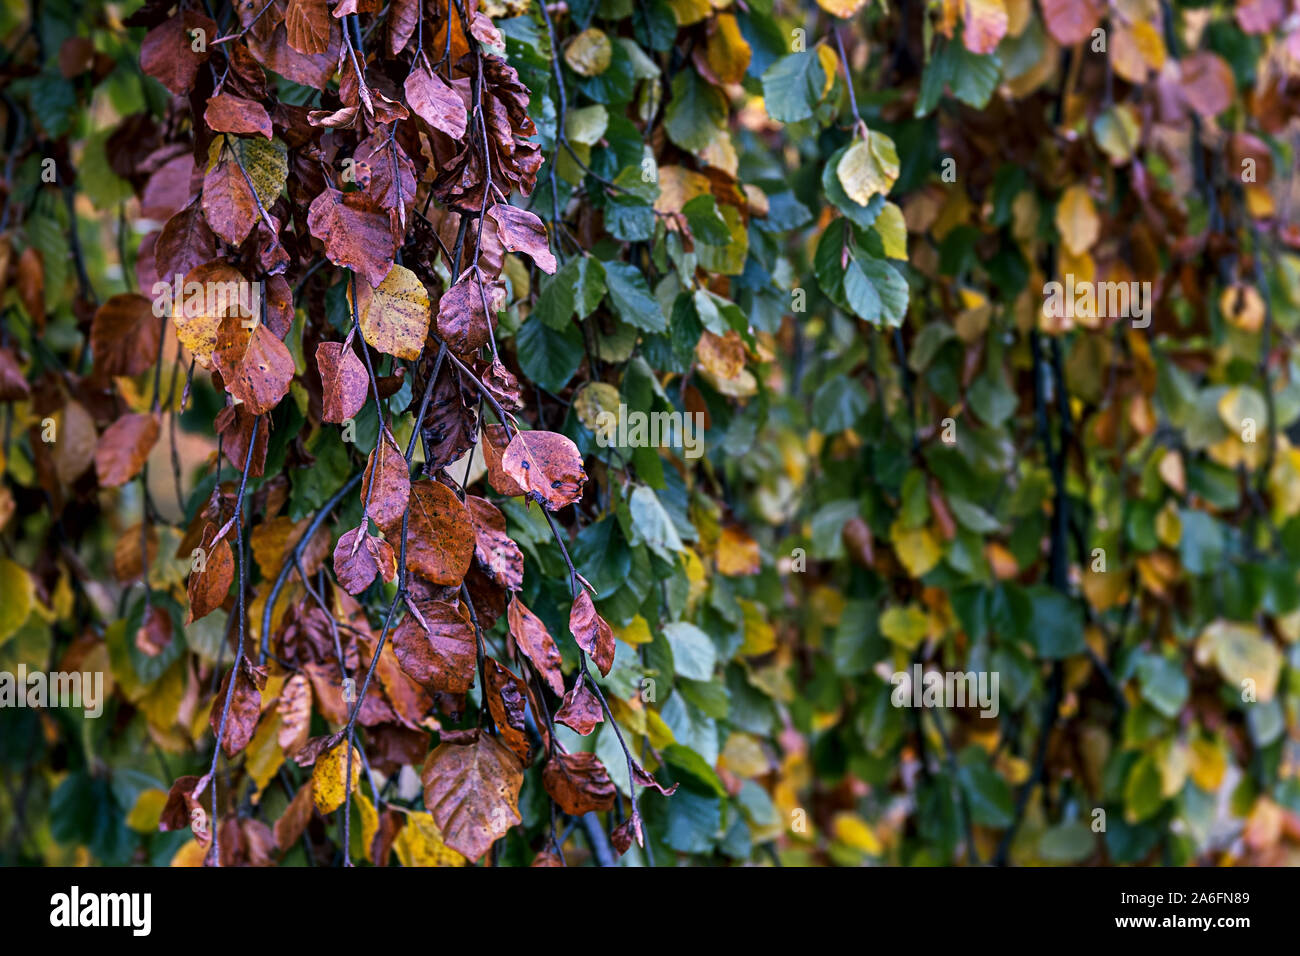 autumn leaves of a weeping beech in green, yellow, brown, orange, golden color Stock Photo